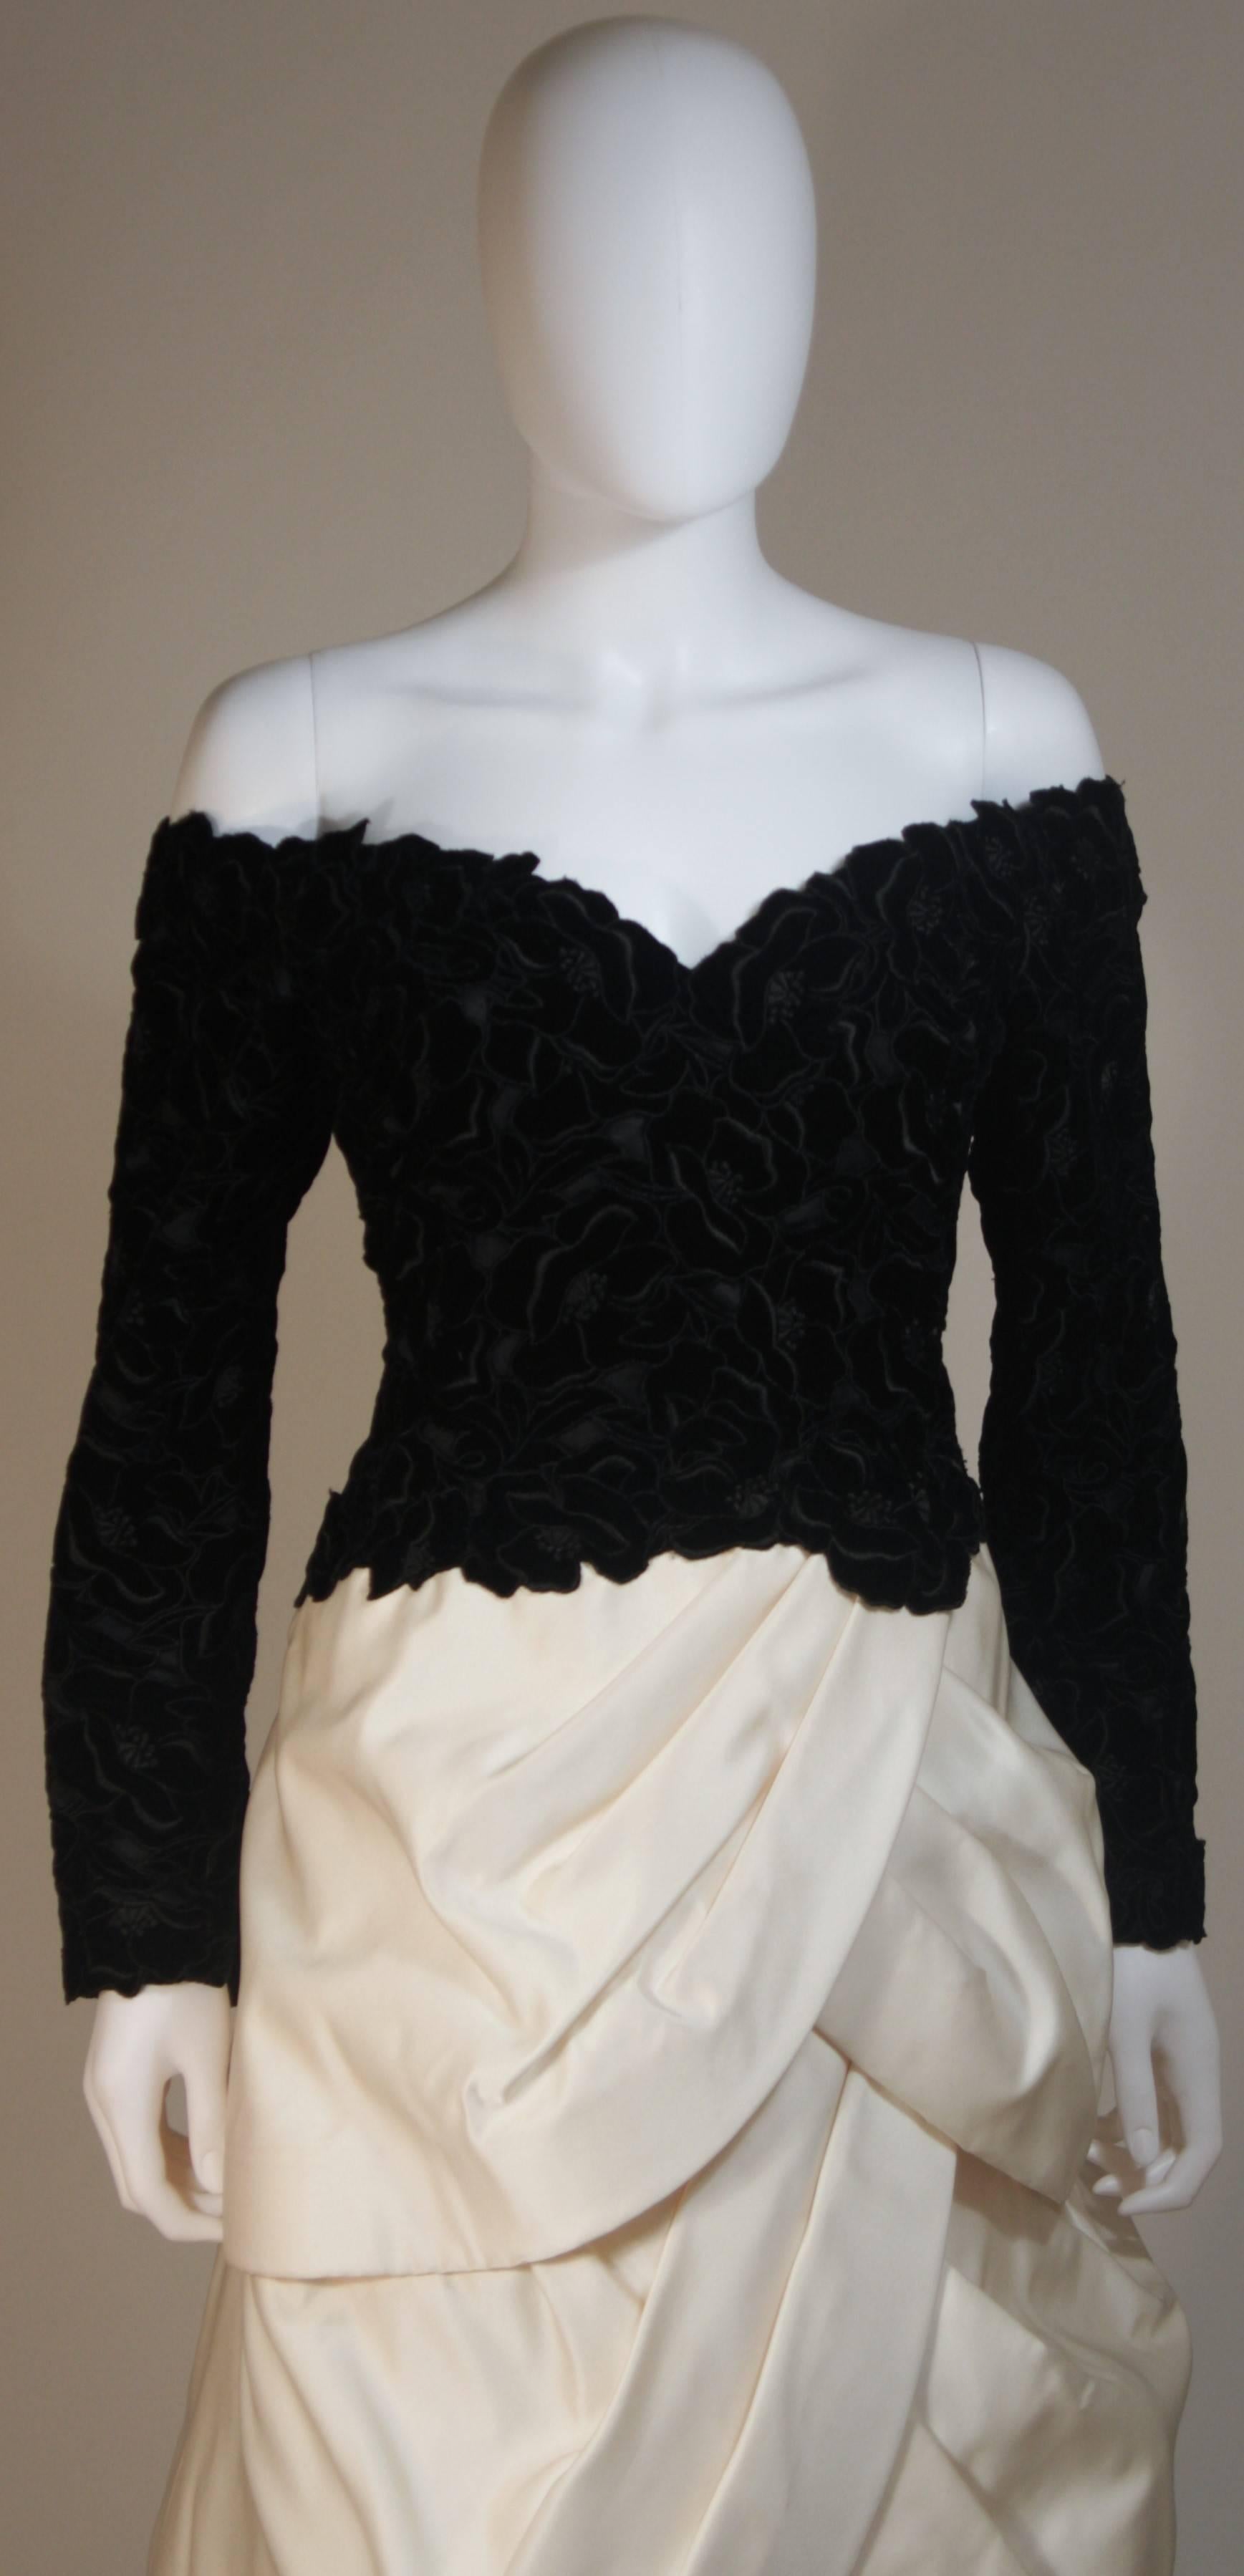 Beige ARNOLD SCAASI Black Velvet Floral Design Gown with Satin Tiered Skirt Size 12-14 For Sale